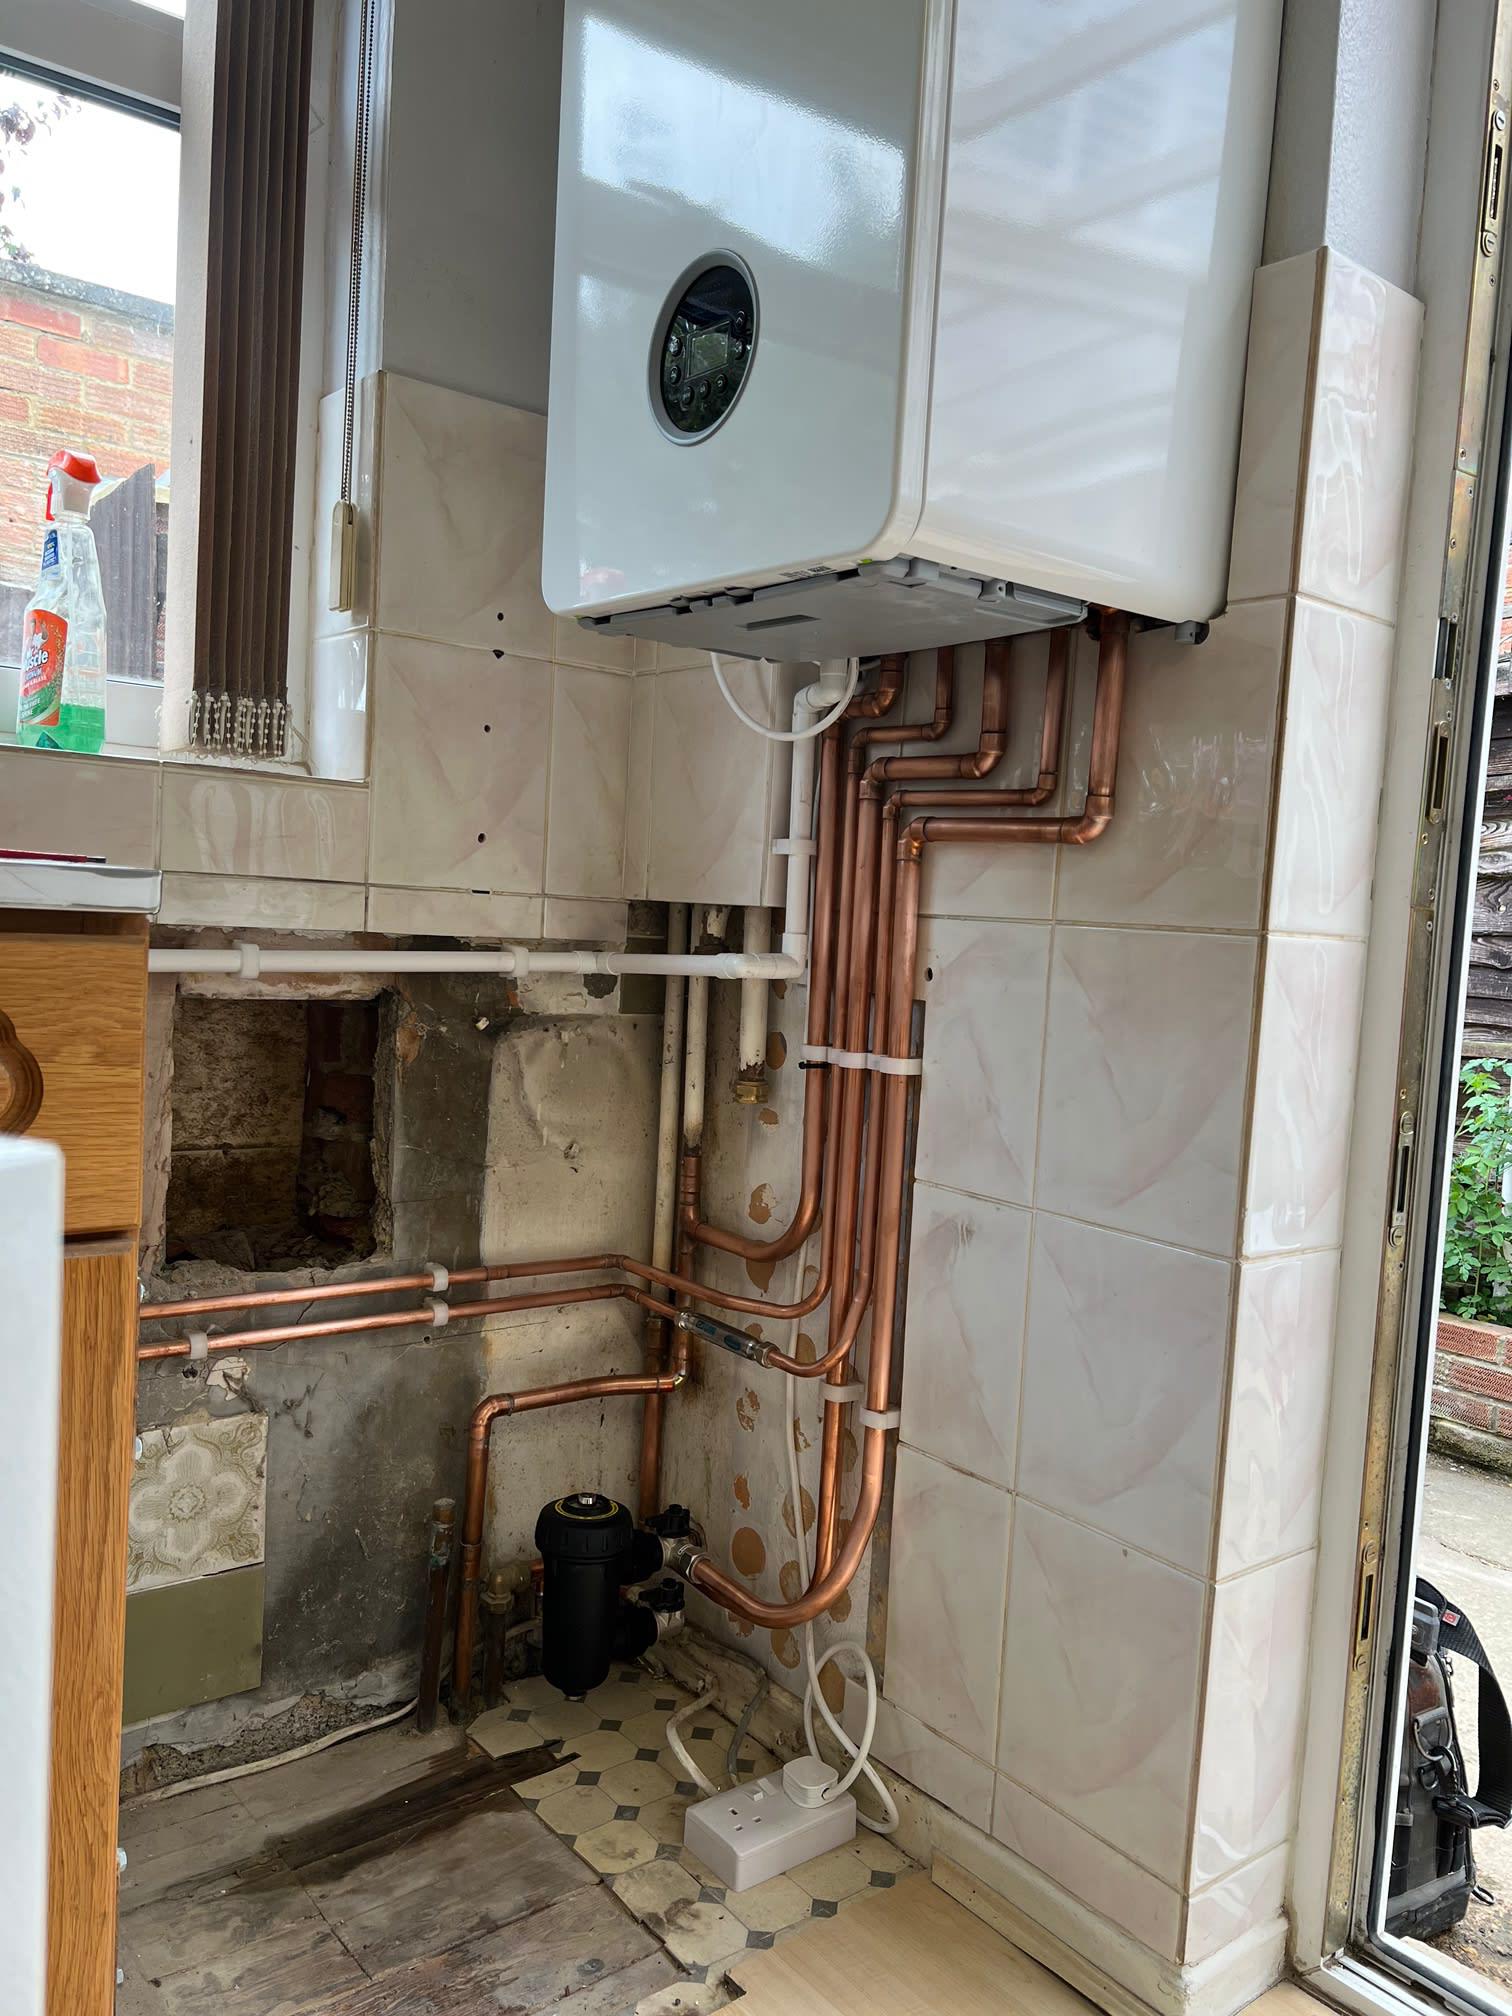 Images Mayne Plumbing and Heating Services Ltd